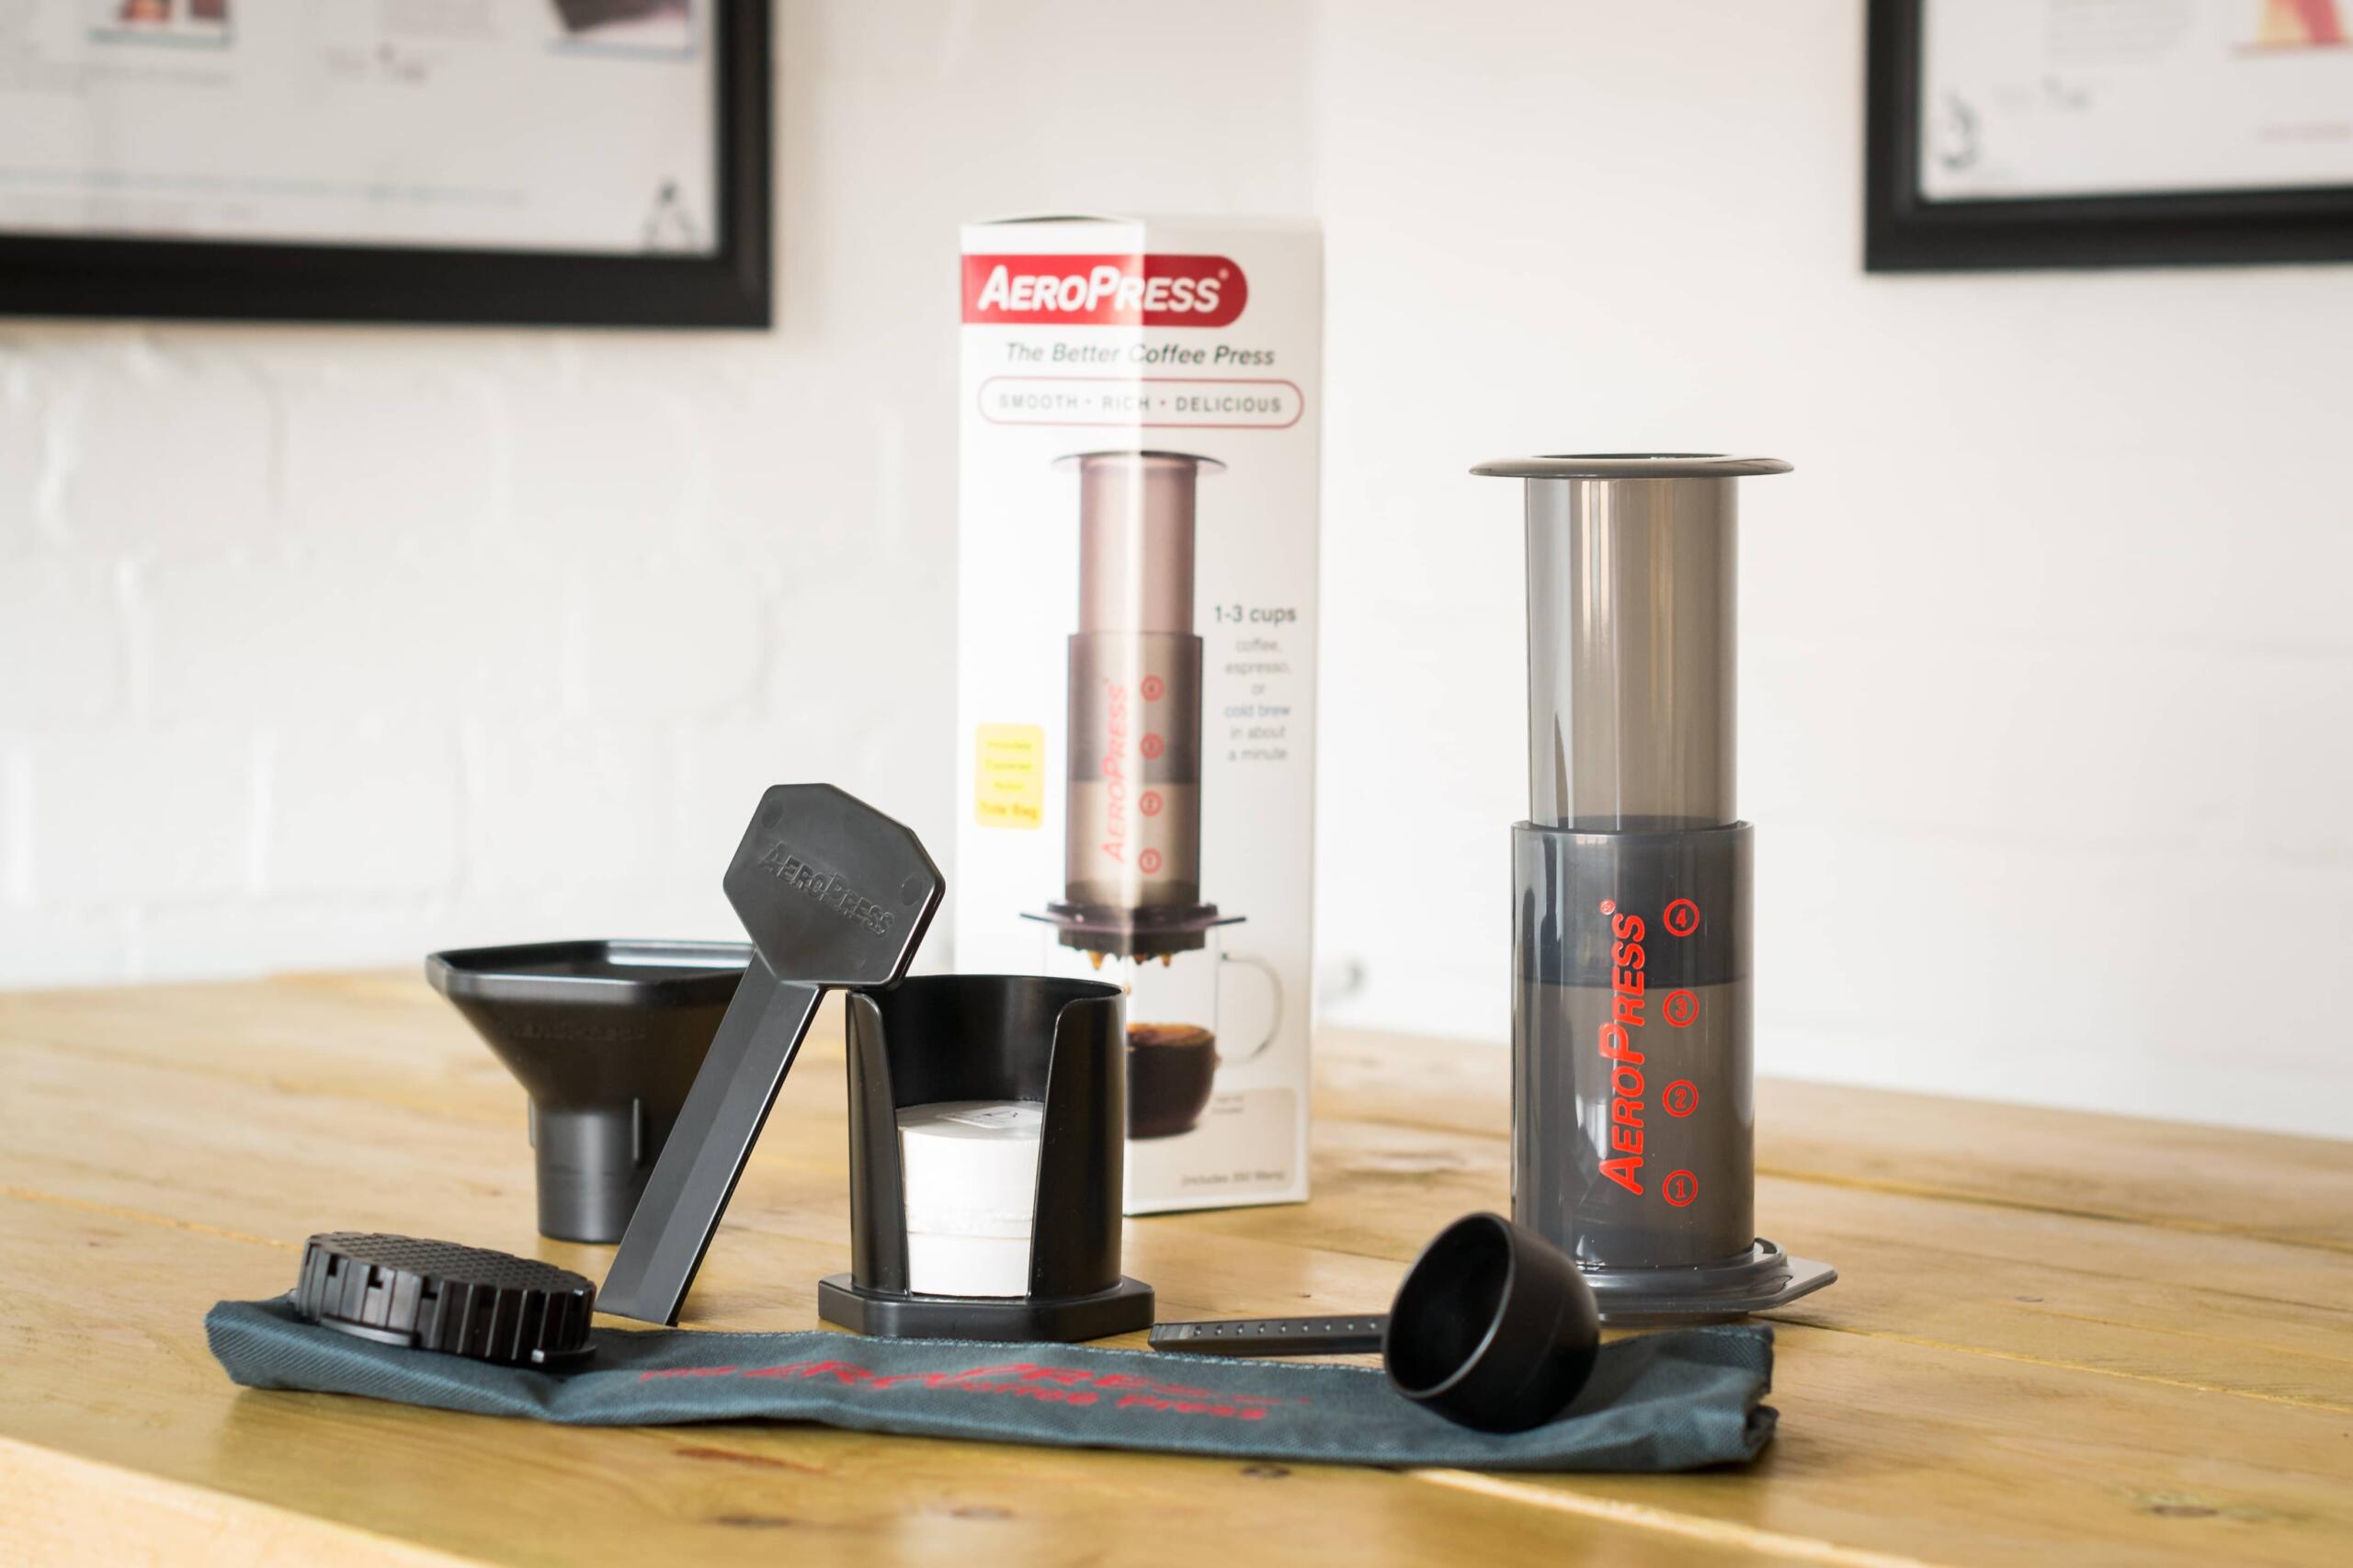 aeropress out of box on the table